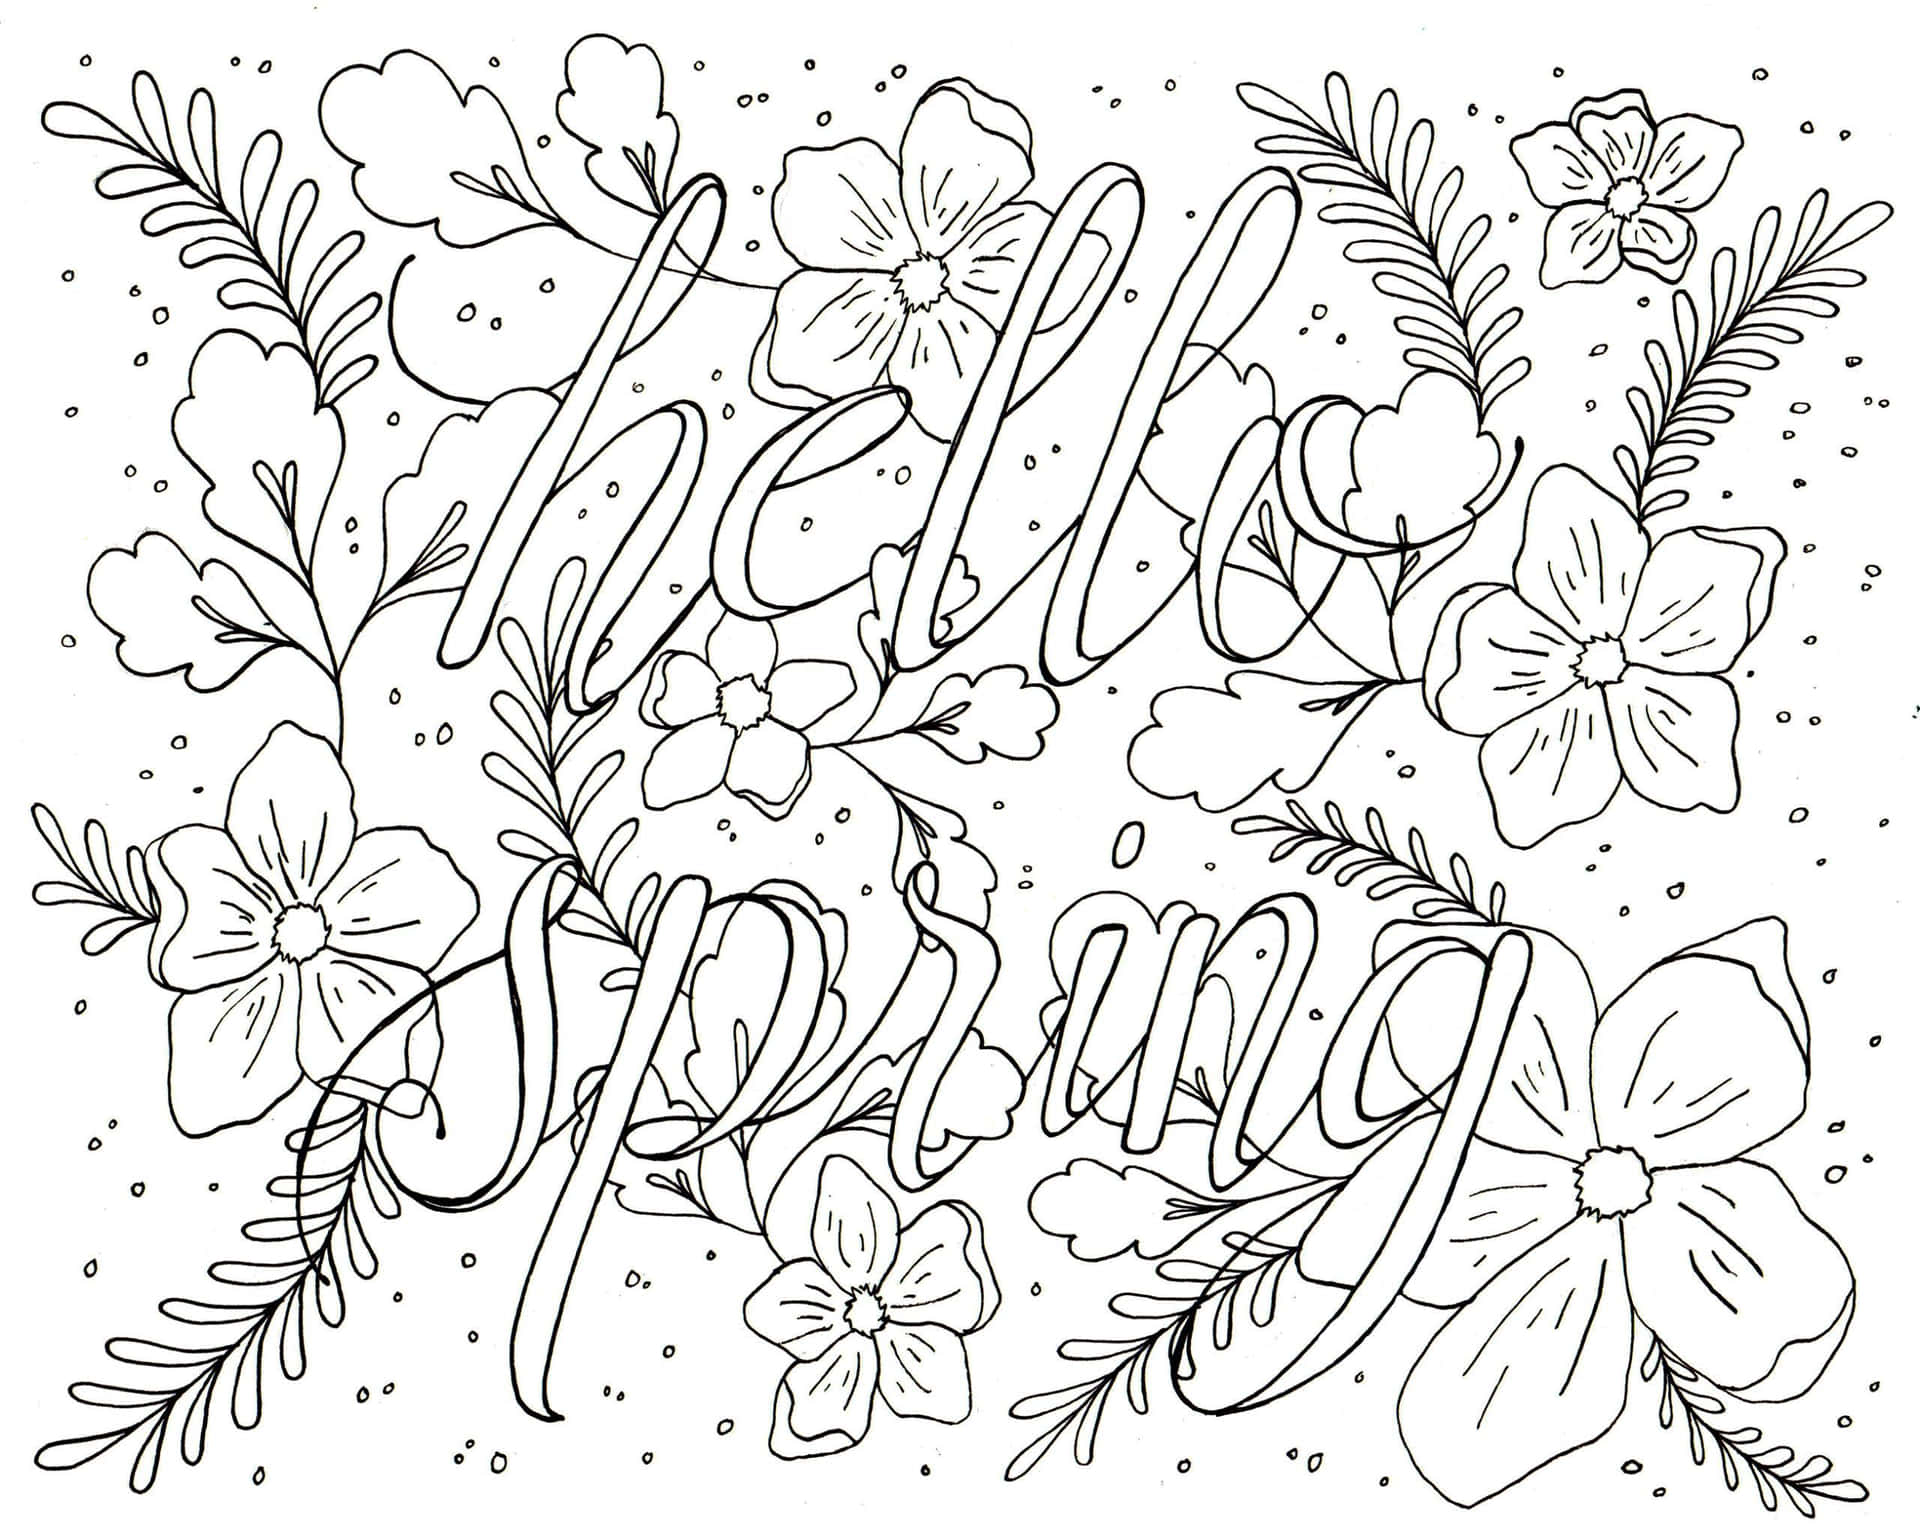 Create beautiful spring-themed decorations with these free coloring pages